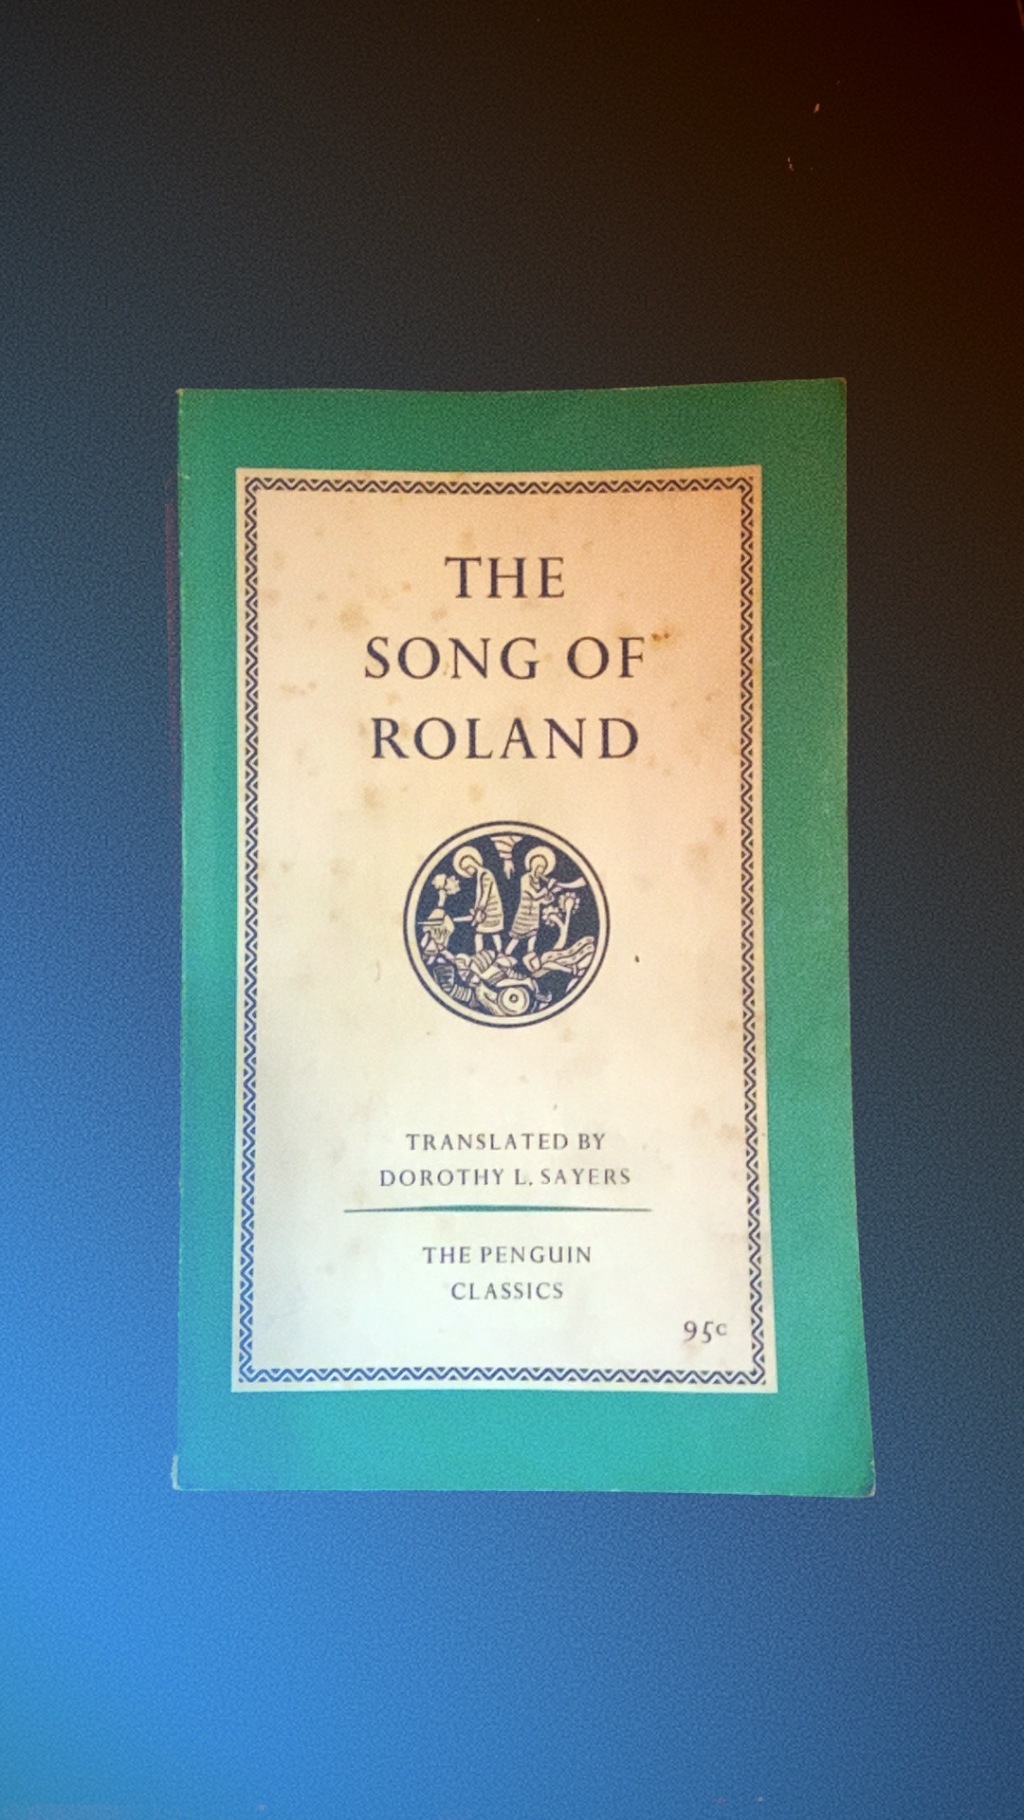 The Song of Roland